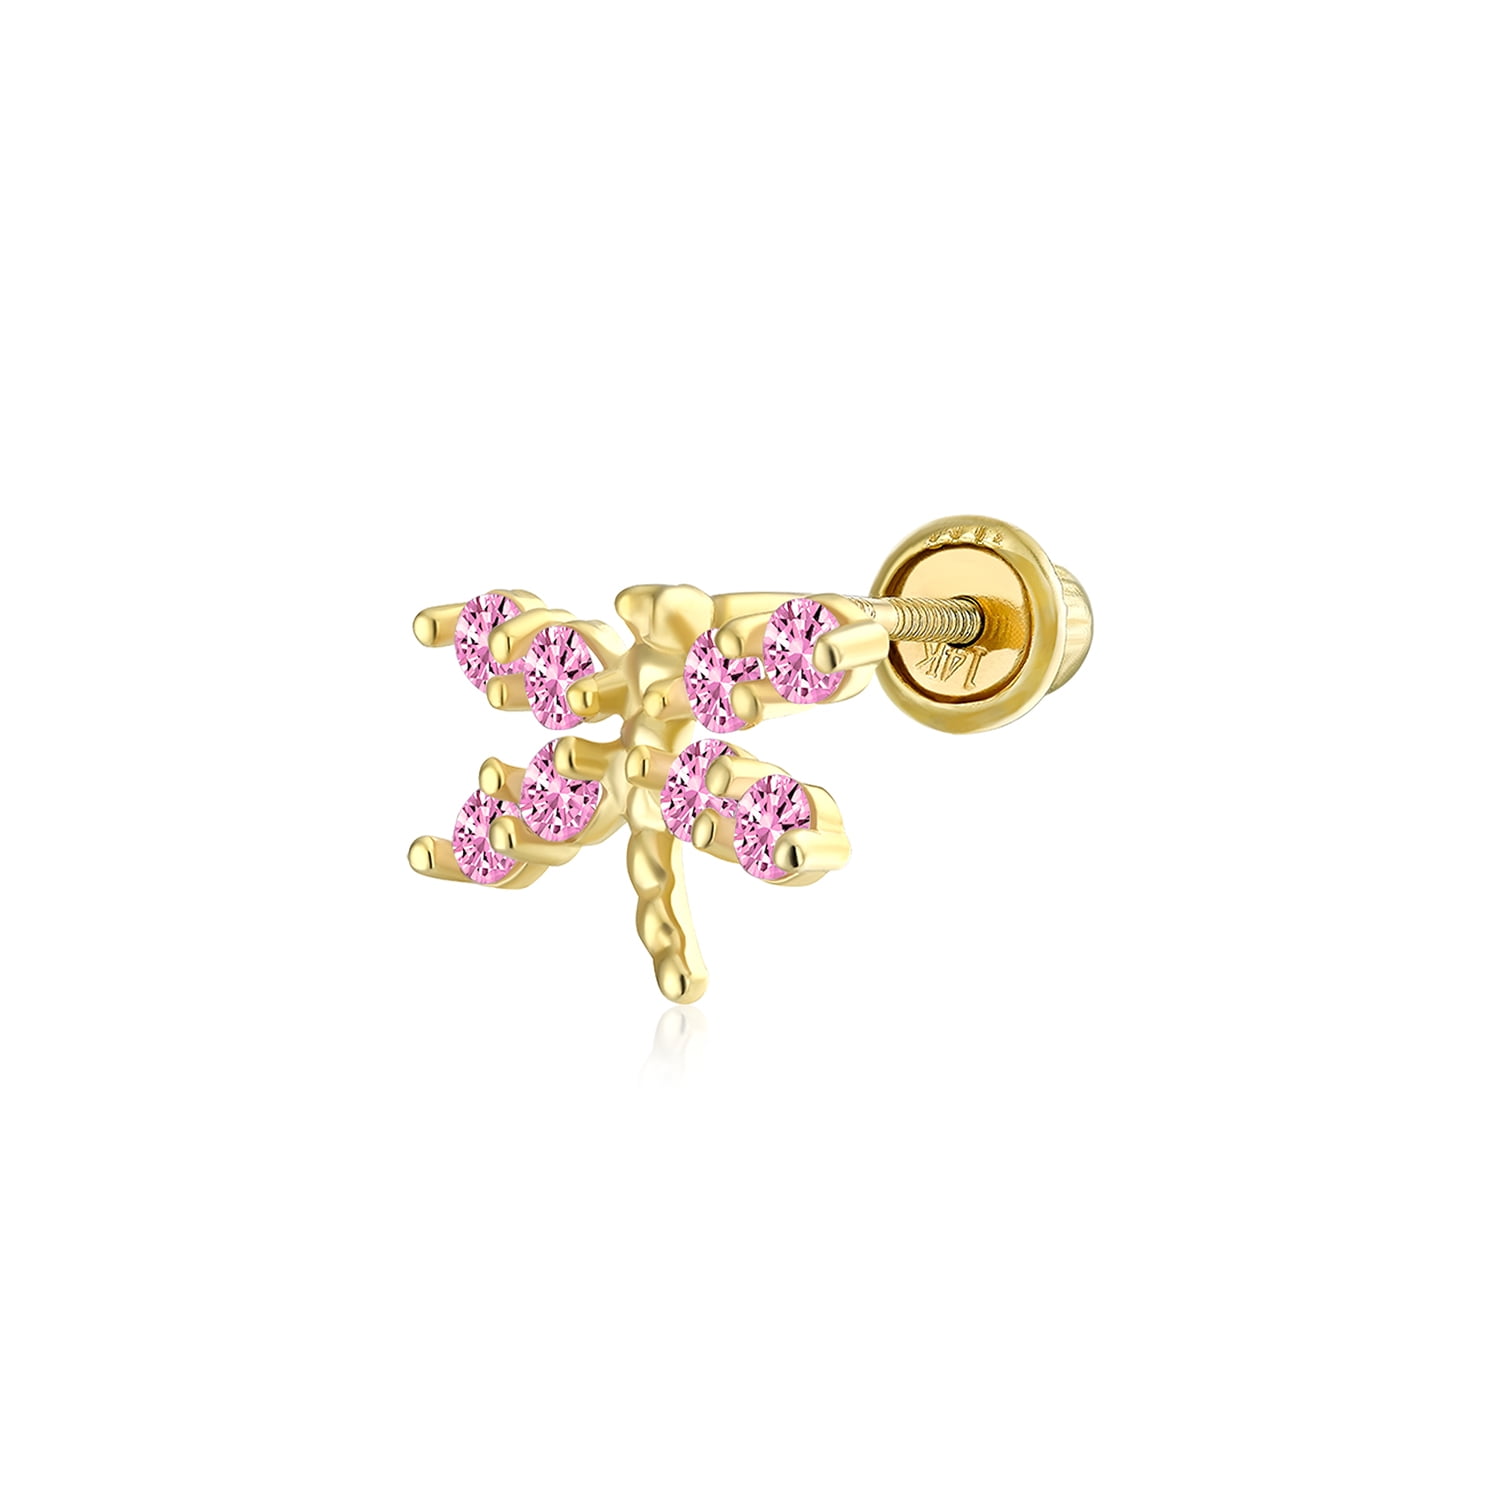 Details about   14k Gold Love Heart Pink CZ Simulated October Birthstone Pendant 